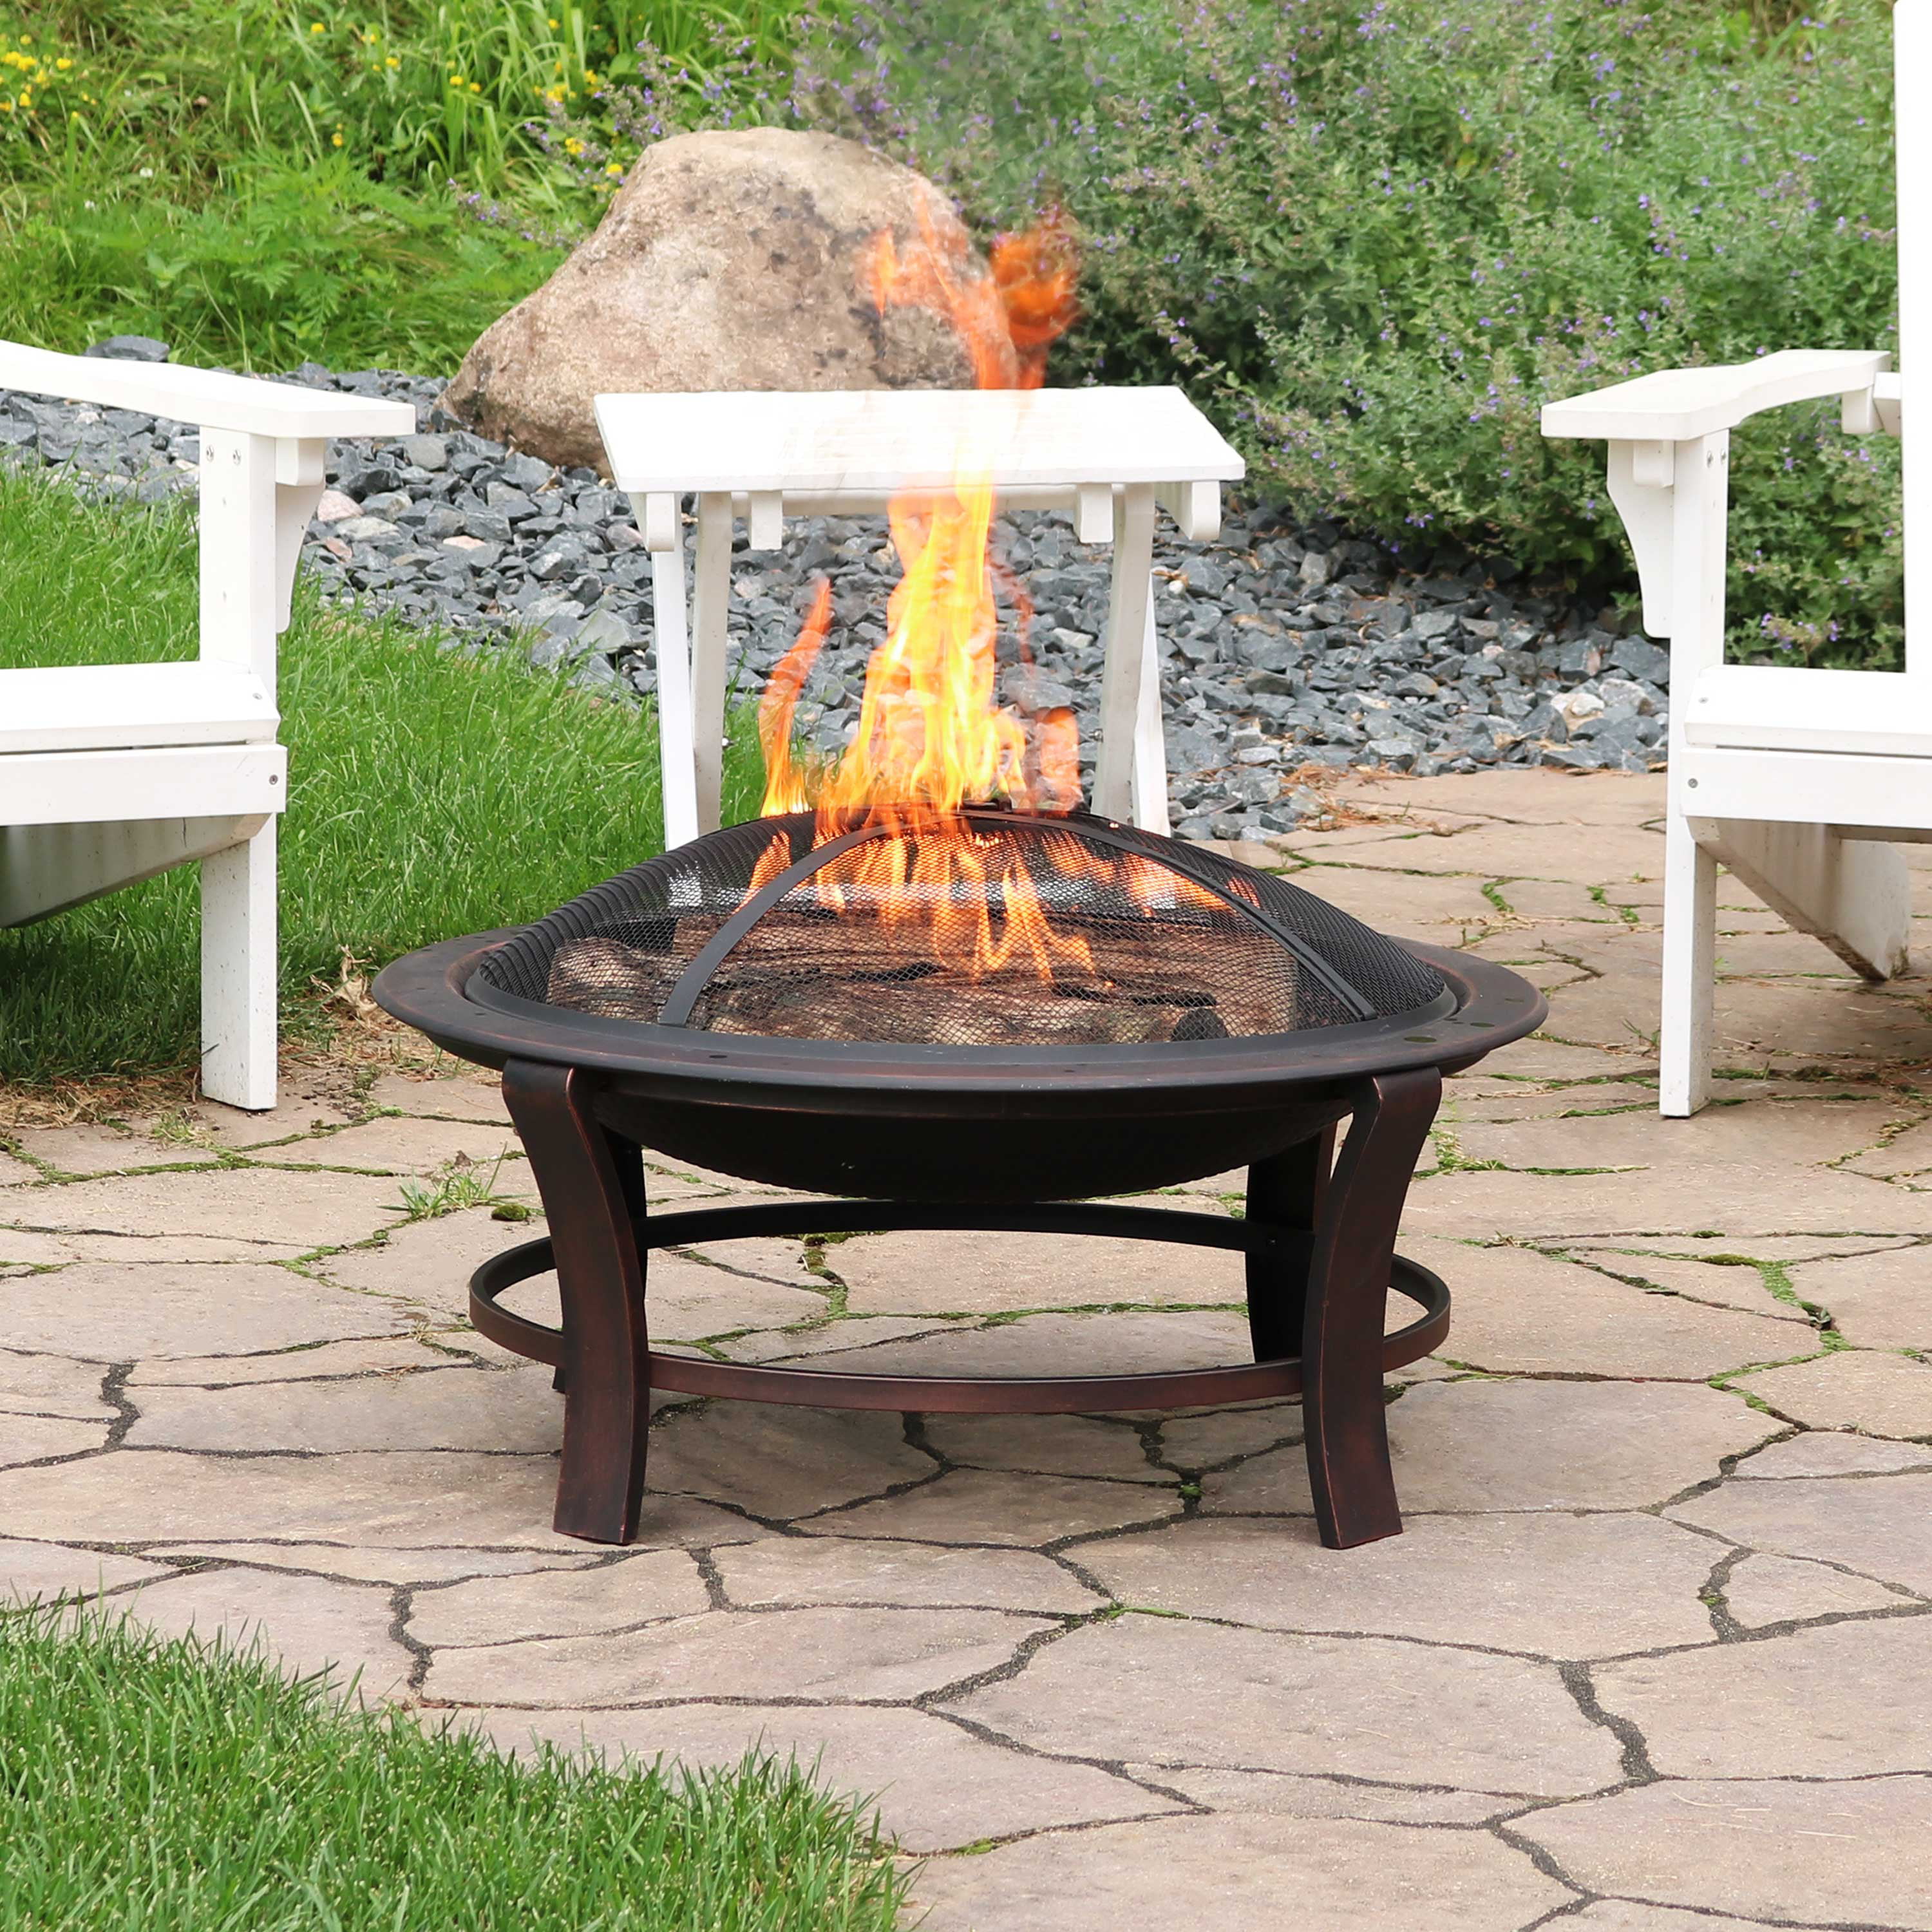 Sunnydaze Elevated Round Fire Pit Bowl, Gas Fire Pit Screened Porch